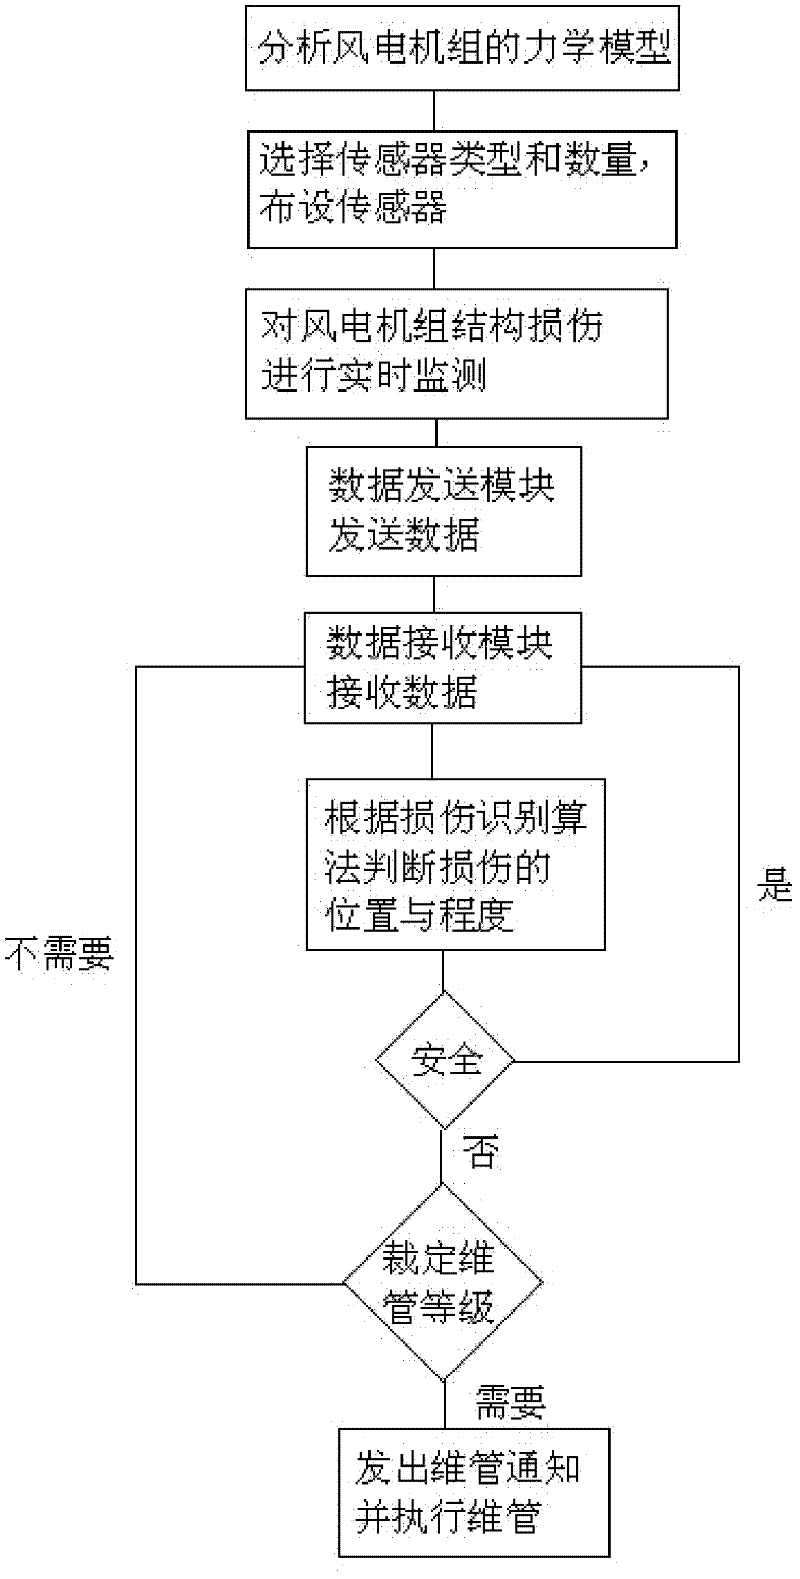 Health monitoring system and method for wind generator system structure